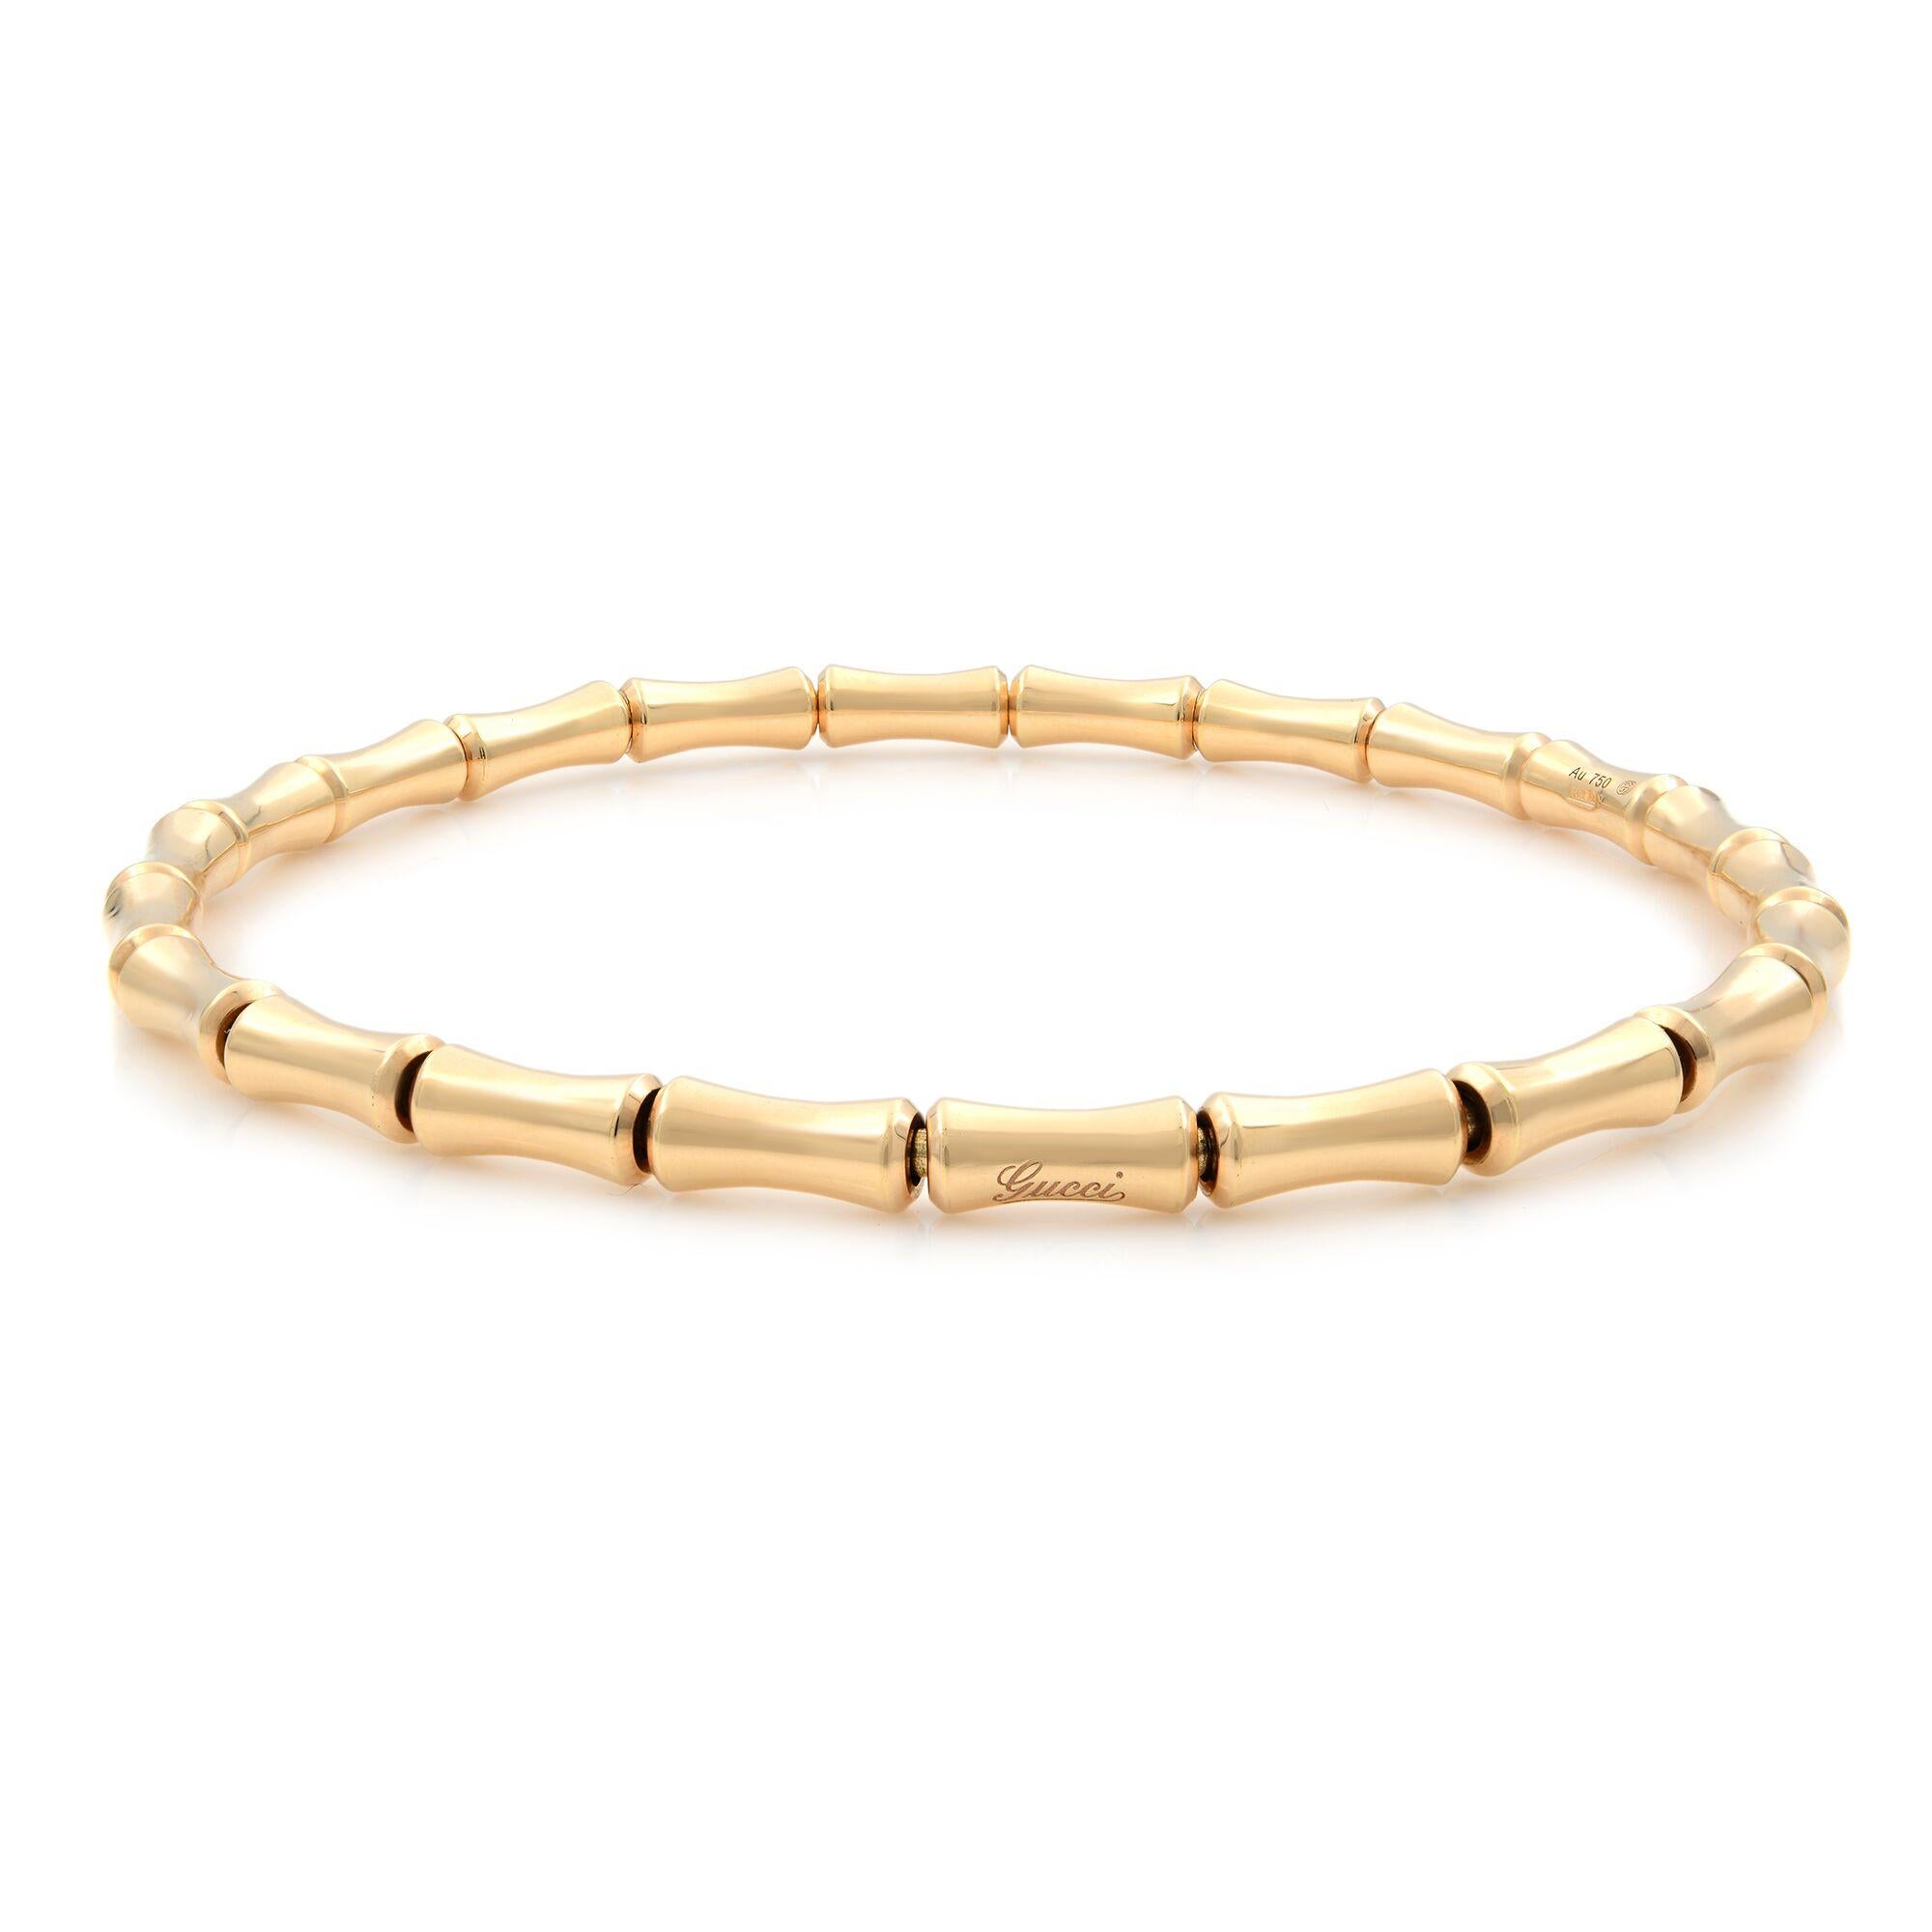 This is a beautiful Gucci 18K Rose Gold Bamboo Extension Stretch Bracelet. 
Bracelet Size: 18 ( 8 inches)
Width: 3.7mm
Weight: 9.0 grams
Markings: GUCCI 750; 18K Rose Gold.
Condition: This piece is like new, shows no sign of wear. Please see